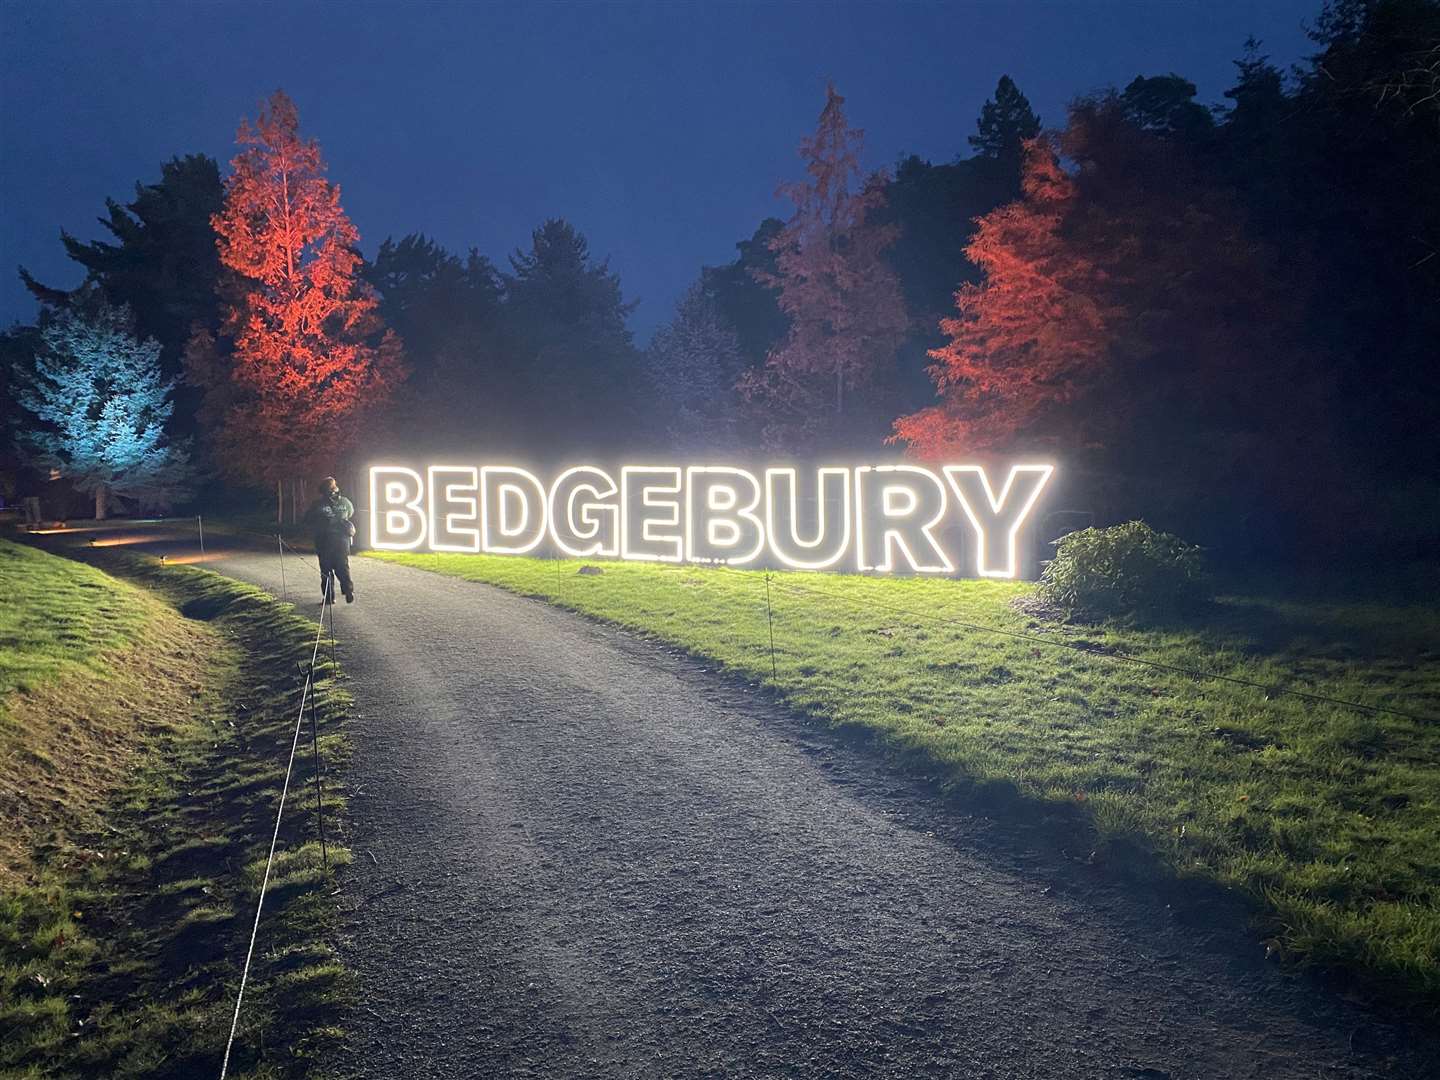 This is the sixth year of Christmas at Bedgebury